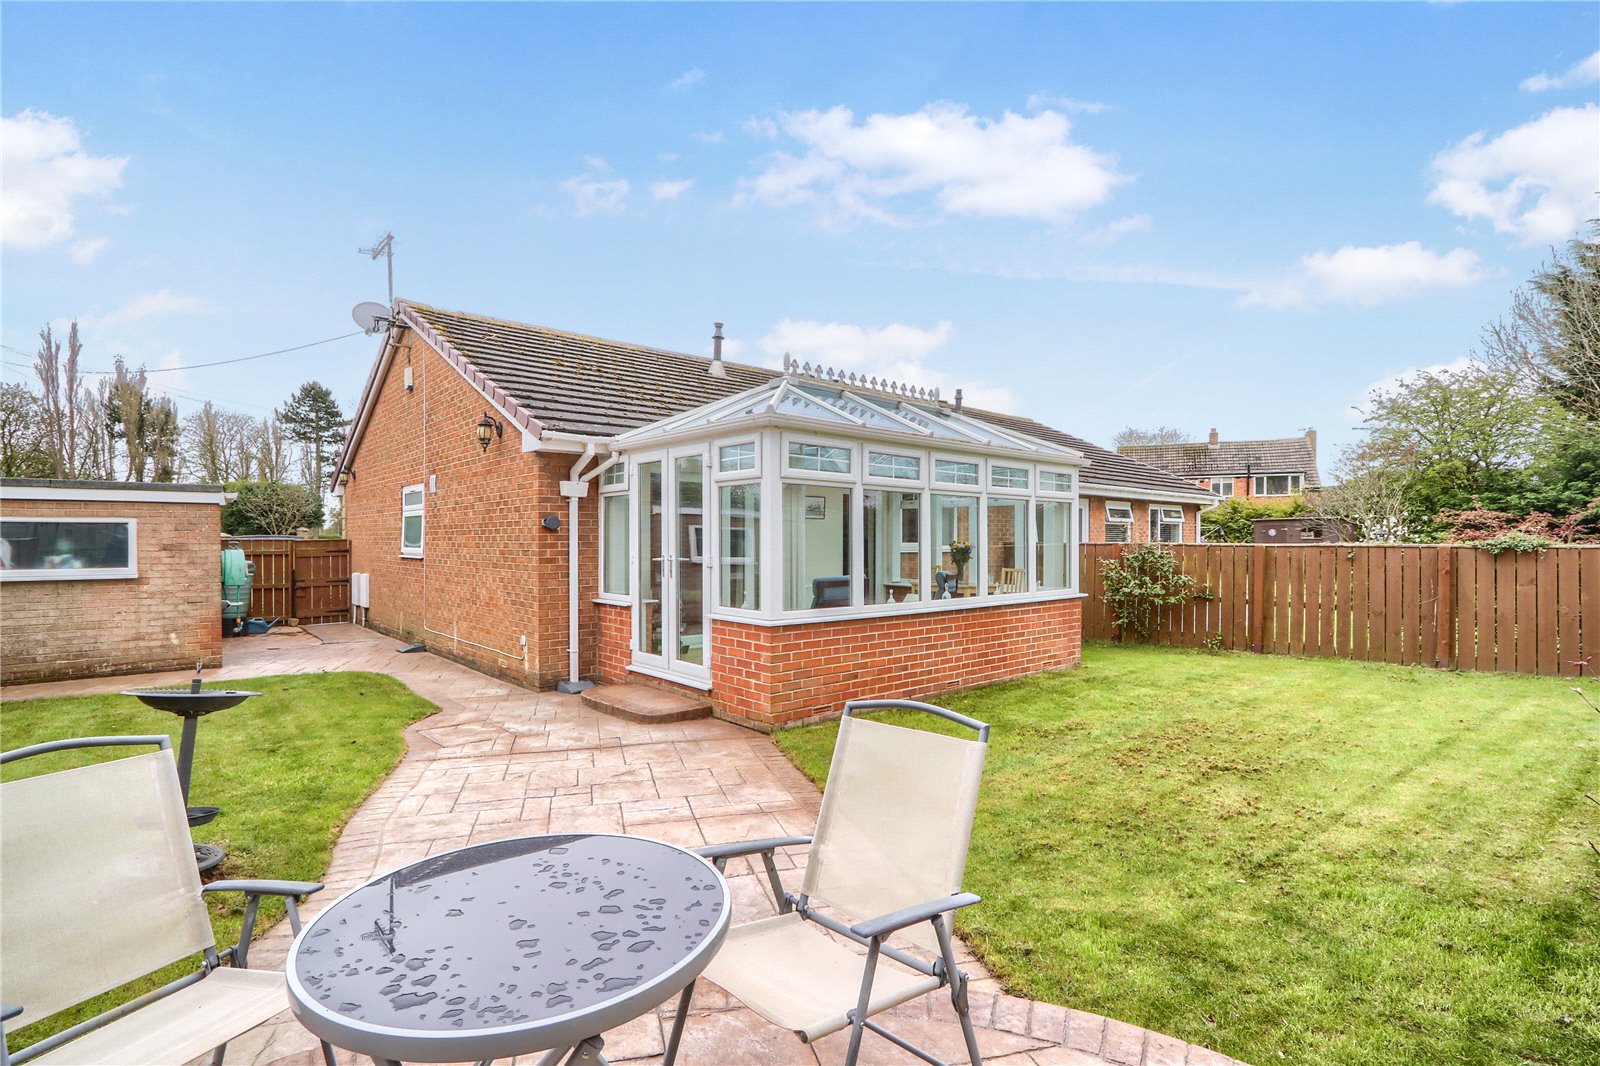 2 bed bungalow for sale in Virginia Close, Stockton-on-Tees  - Property Image 15